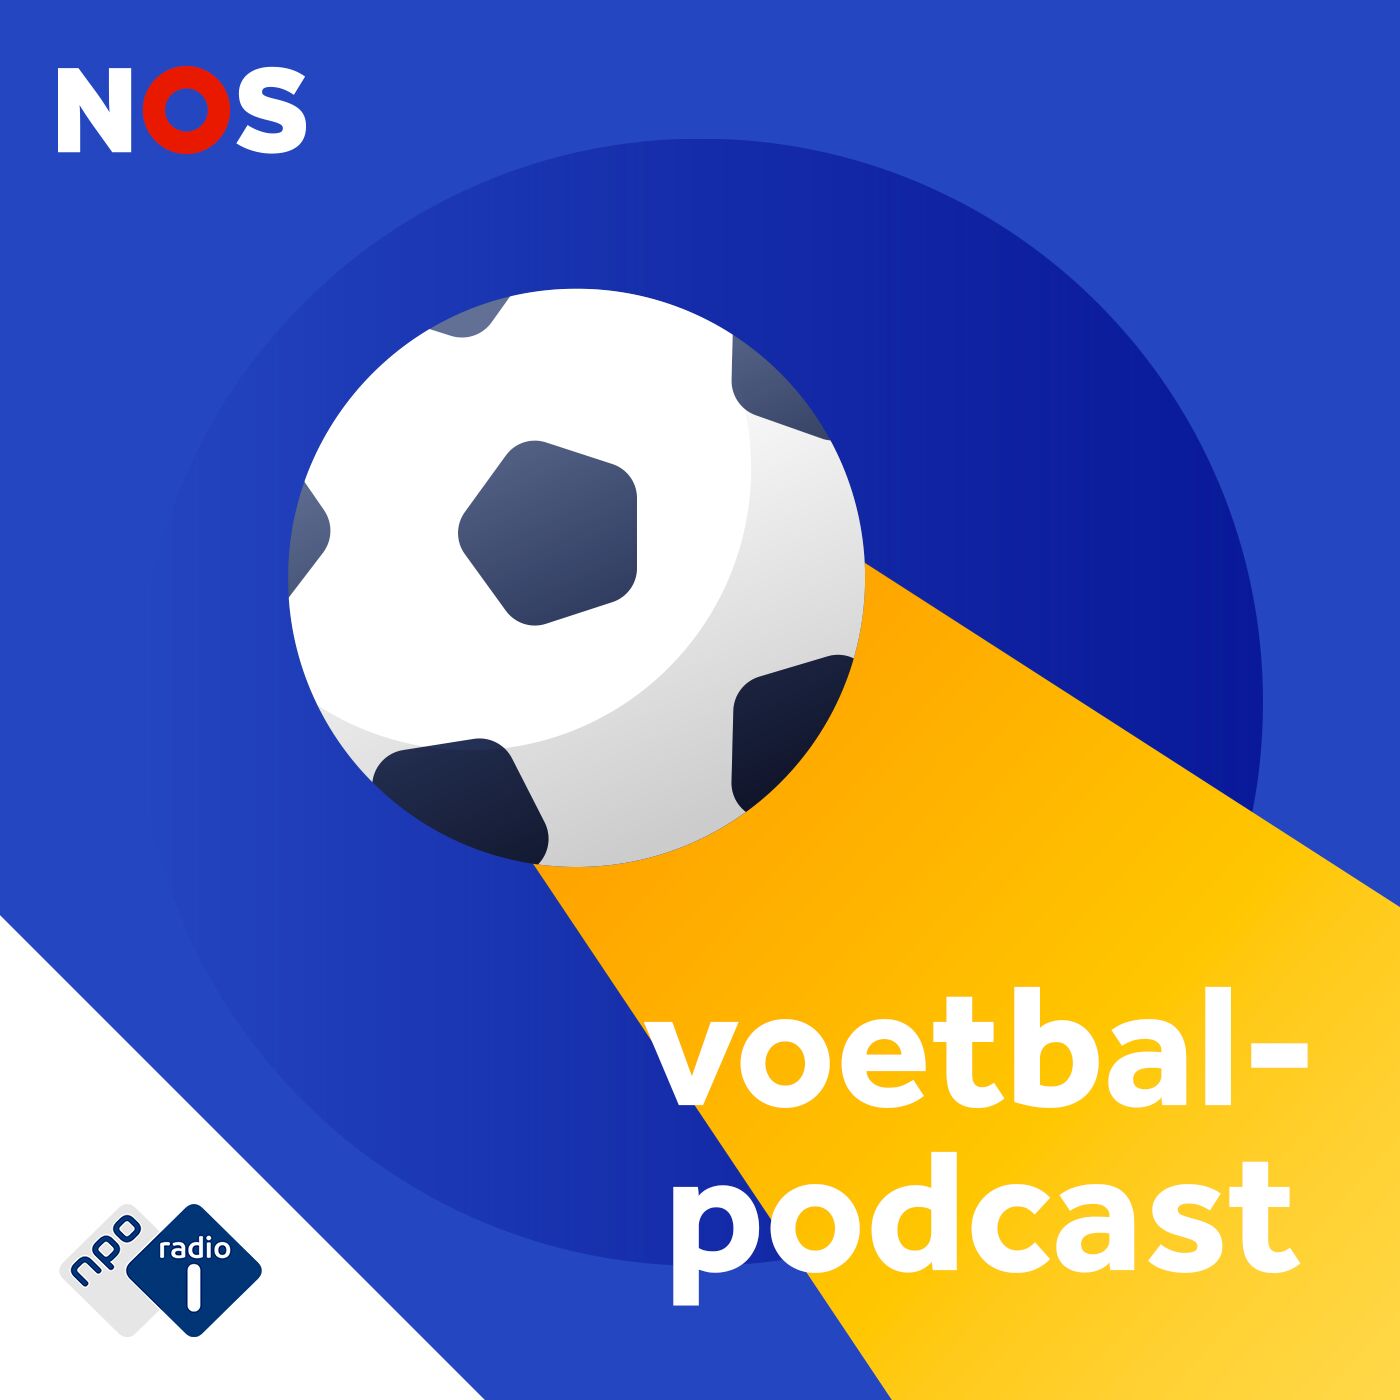 NOS Voetbalpodcast podcast show image